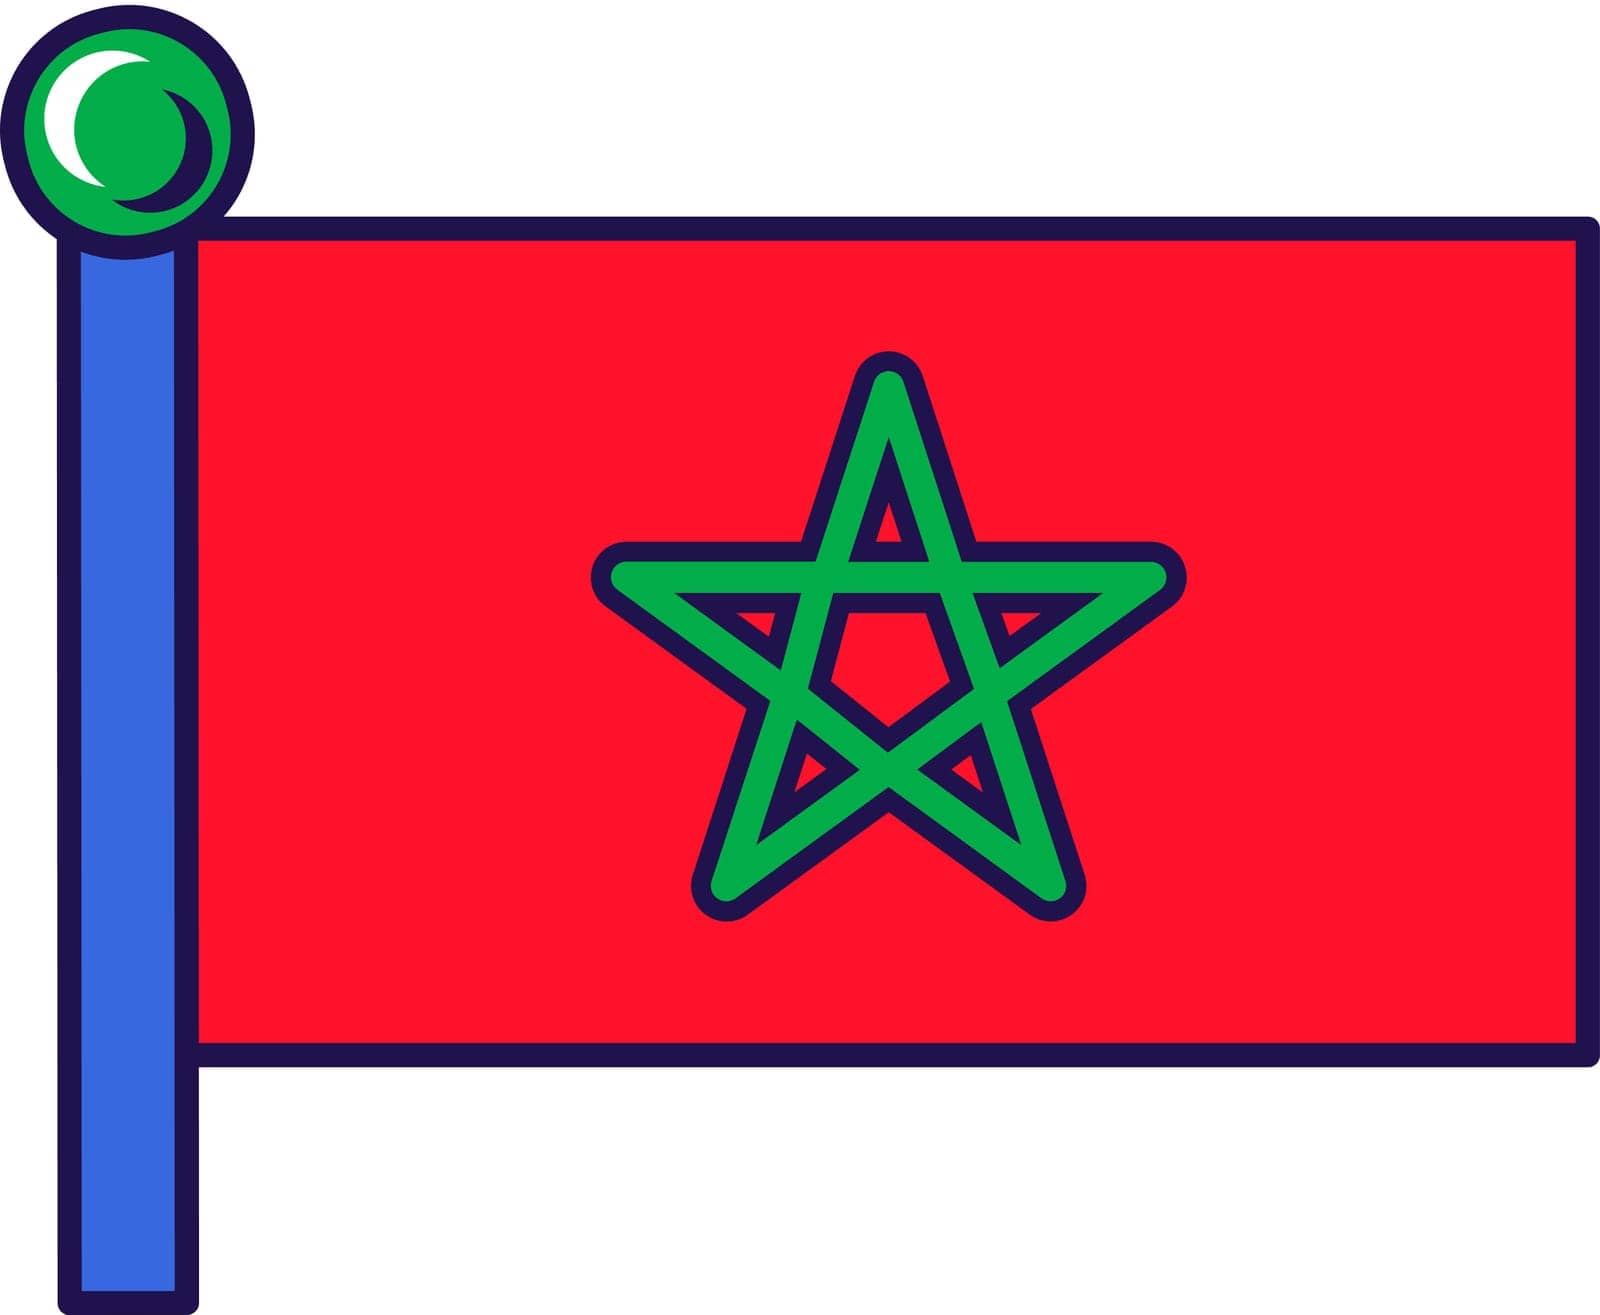 Kingdom of morocco nation flag on flagpole vector. Red field with green pentagram, five pointed linear star on moroccan symbol of islamic african country. State ensign flat cartoon illustration